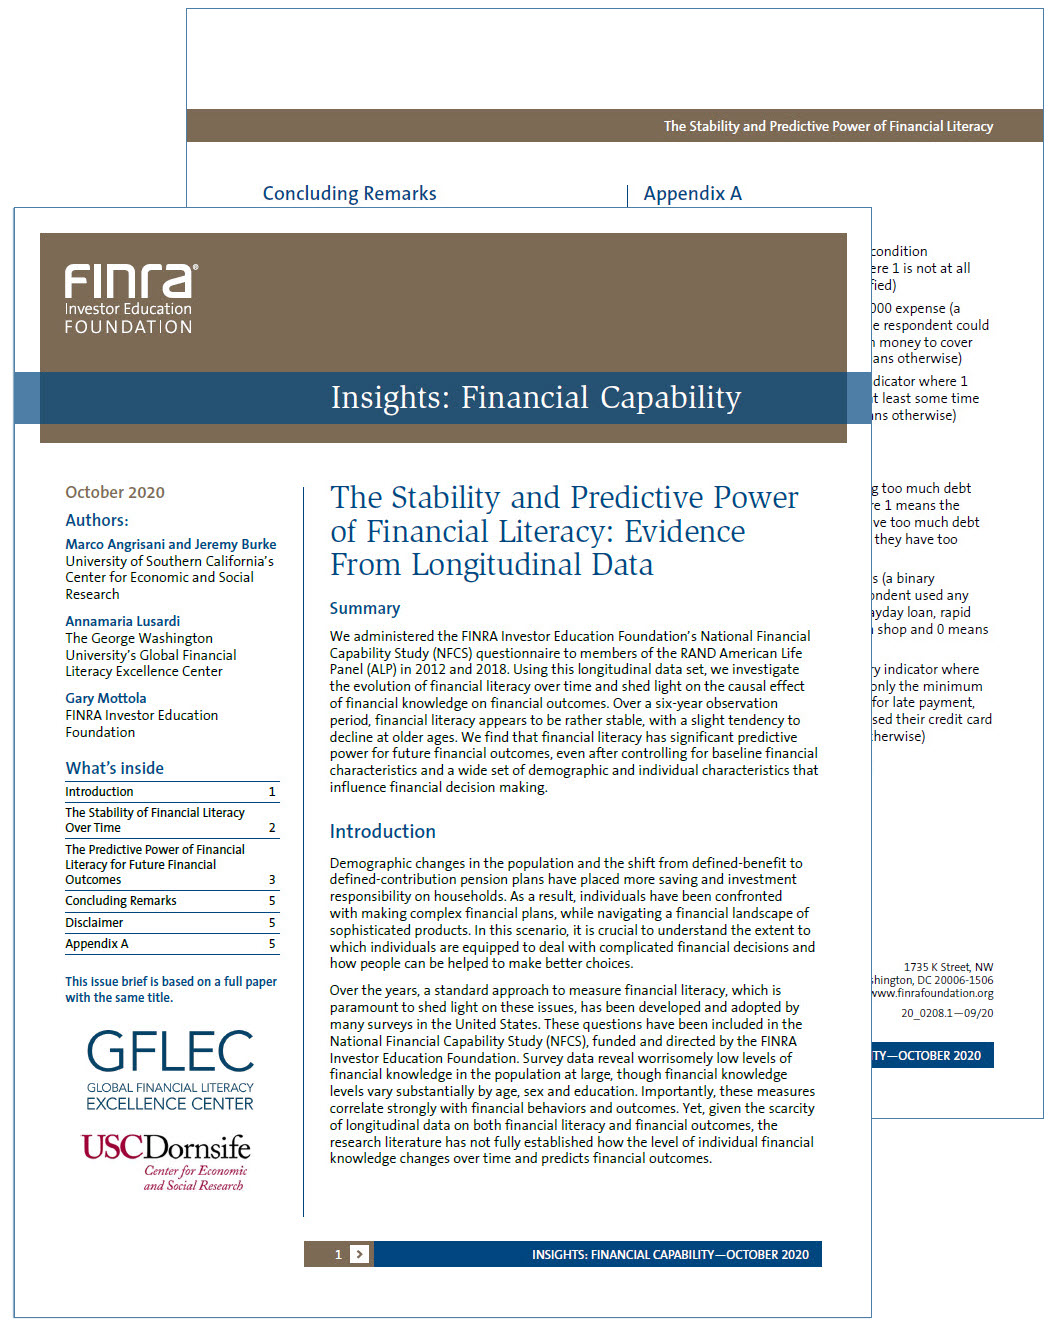 The Stability and Predictive Power of Financial Literacy: Evidence From Longitudinal Data